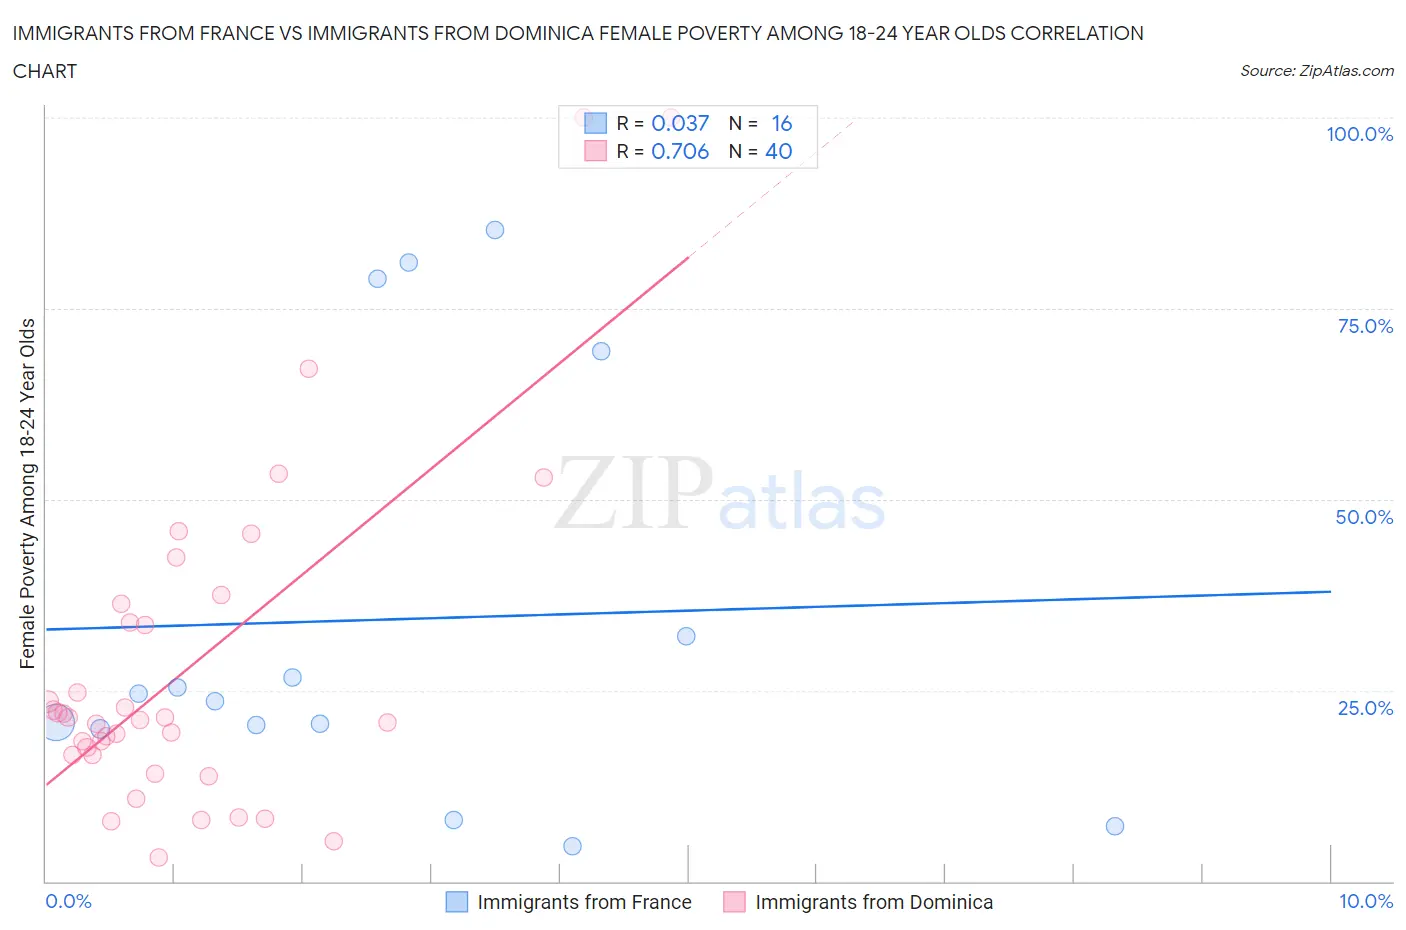 Immigrants from France vs Immigrants from Dominica Female Poverty Among 18-24 Year Olds